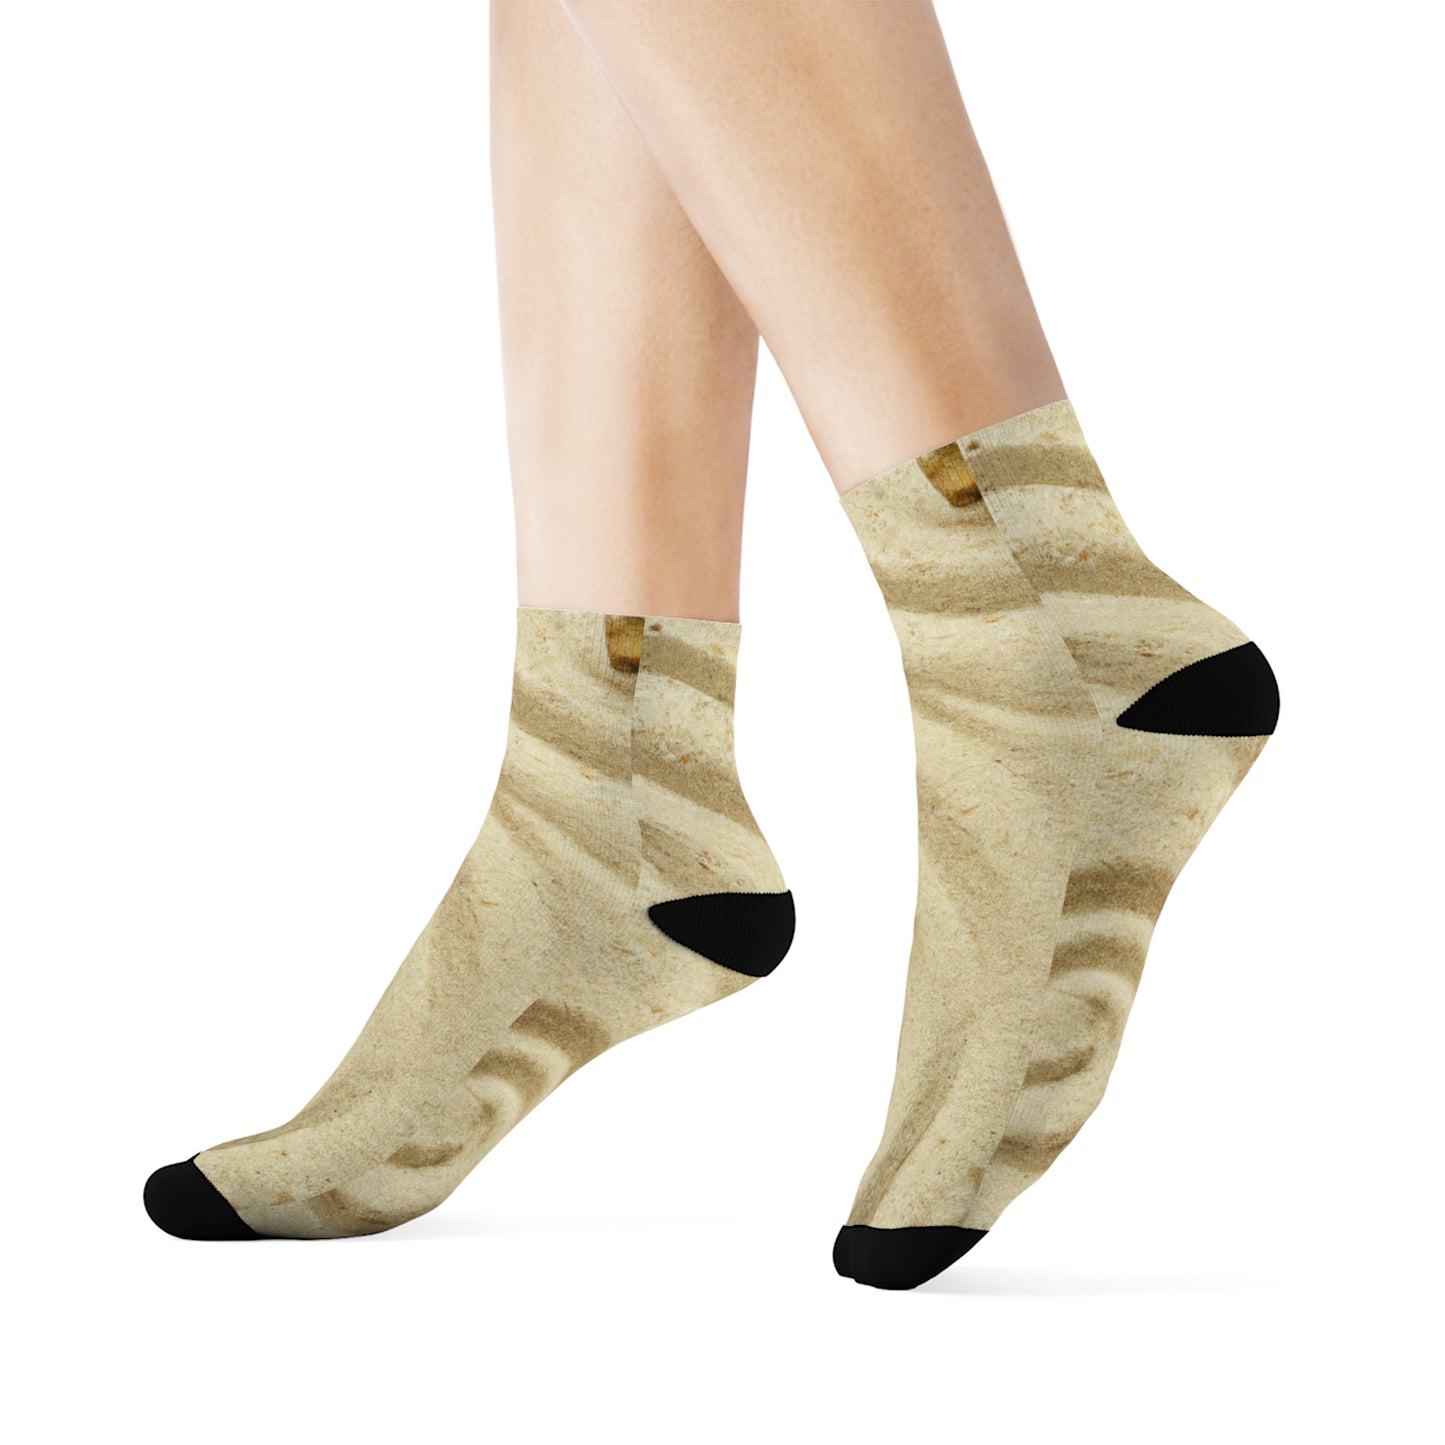 "Tranquil Soles: Zen-Inspired Crew Socks with Serene Raked Sand Patterns and Earthy Stone Motifs" - Men and Women Crew Socks Combed Athletic Sports Casual Classic